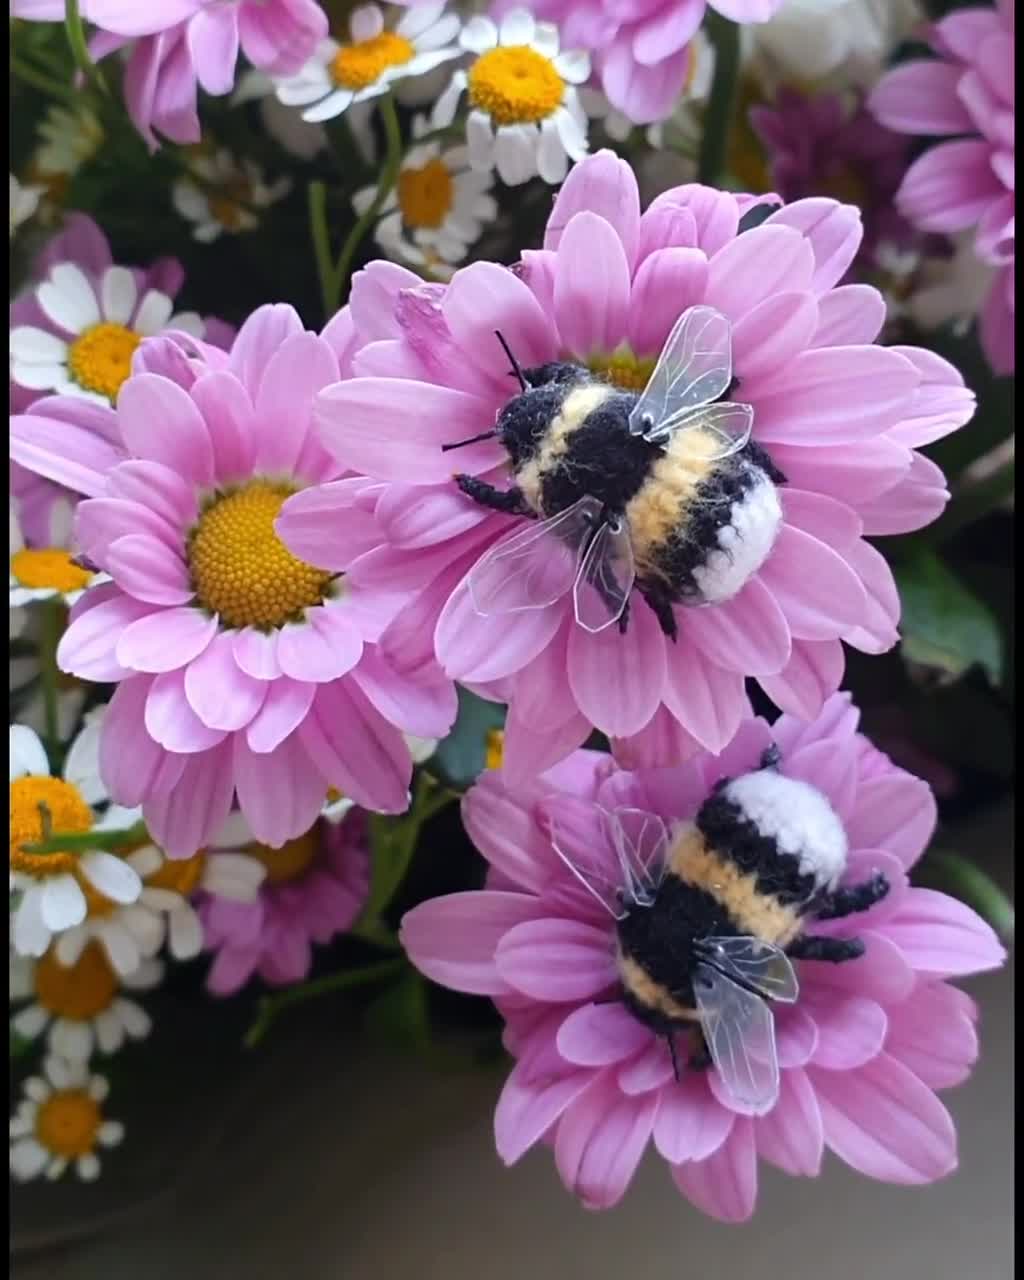 15 Buzzworthy Facts About Bumblebees